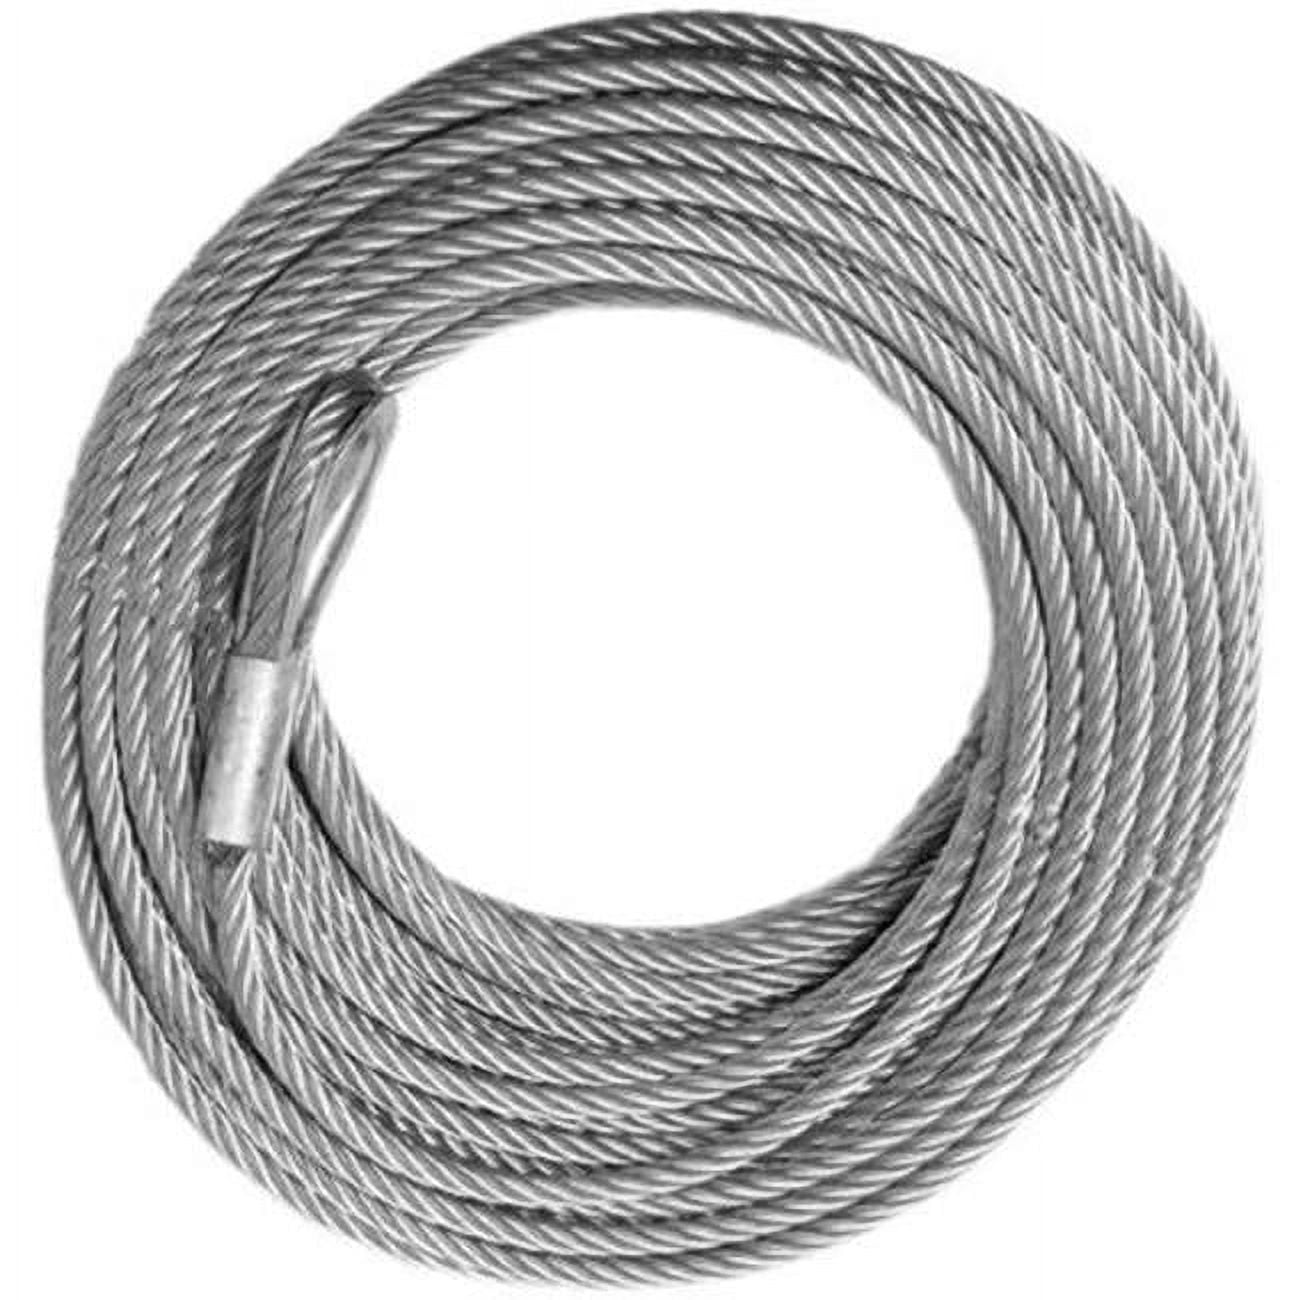 Winch Cable - Galvanized - 5/16 X 125 (9 800lb Strength) (4x4 Vehicle Recovery)